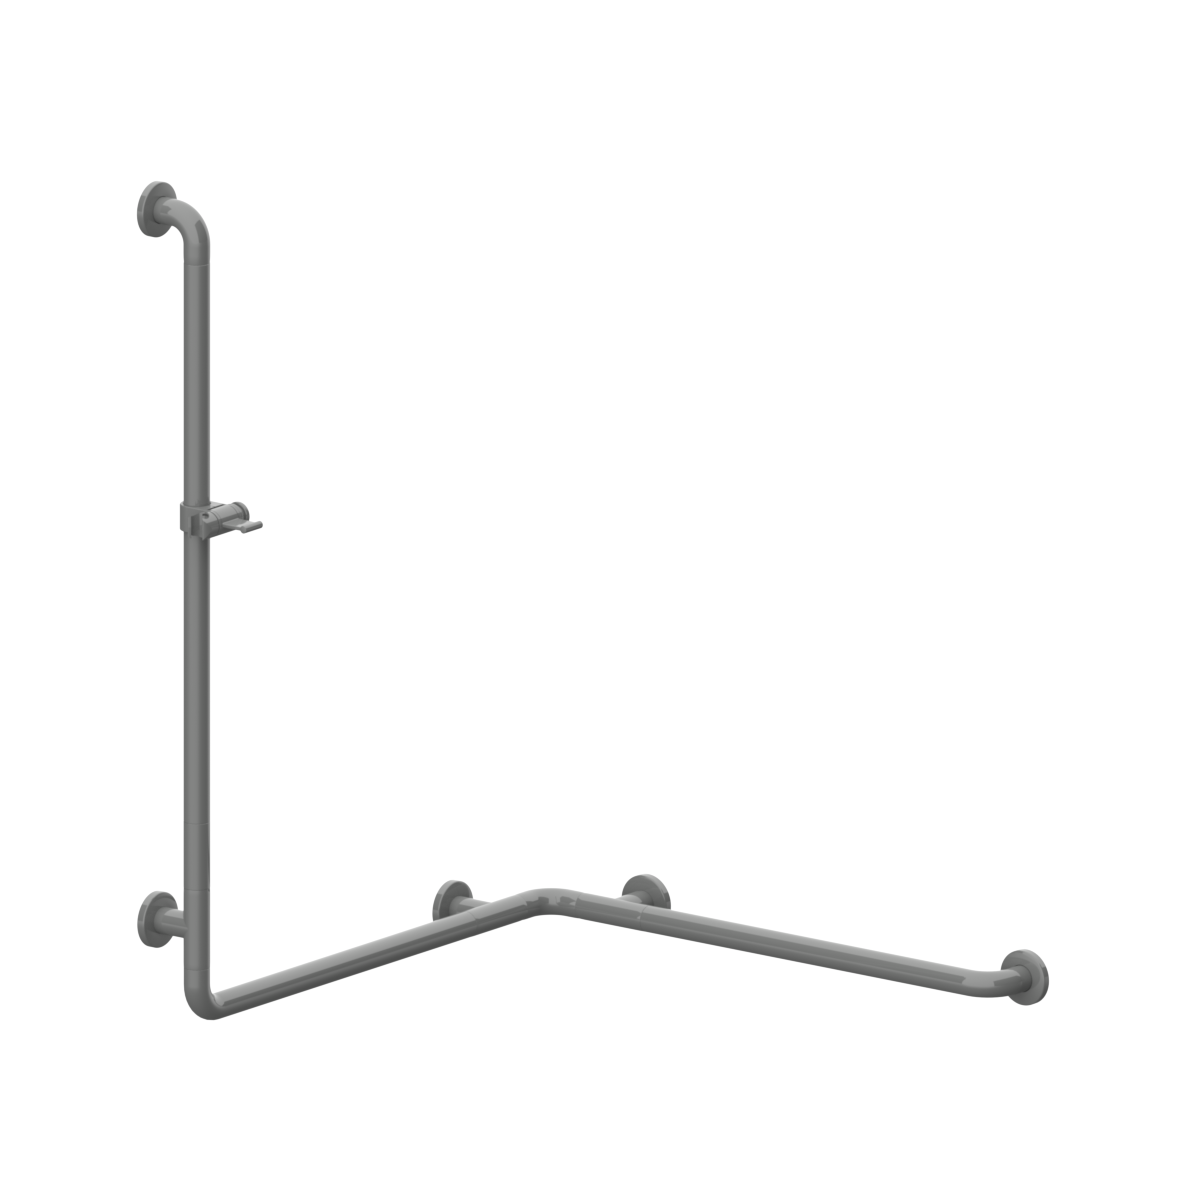 Nylon Care 300 Shower handrail, with shower head rail, left and right, 767 x 767 x 1158 mm, Dark grey